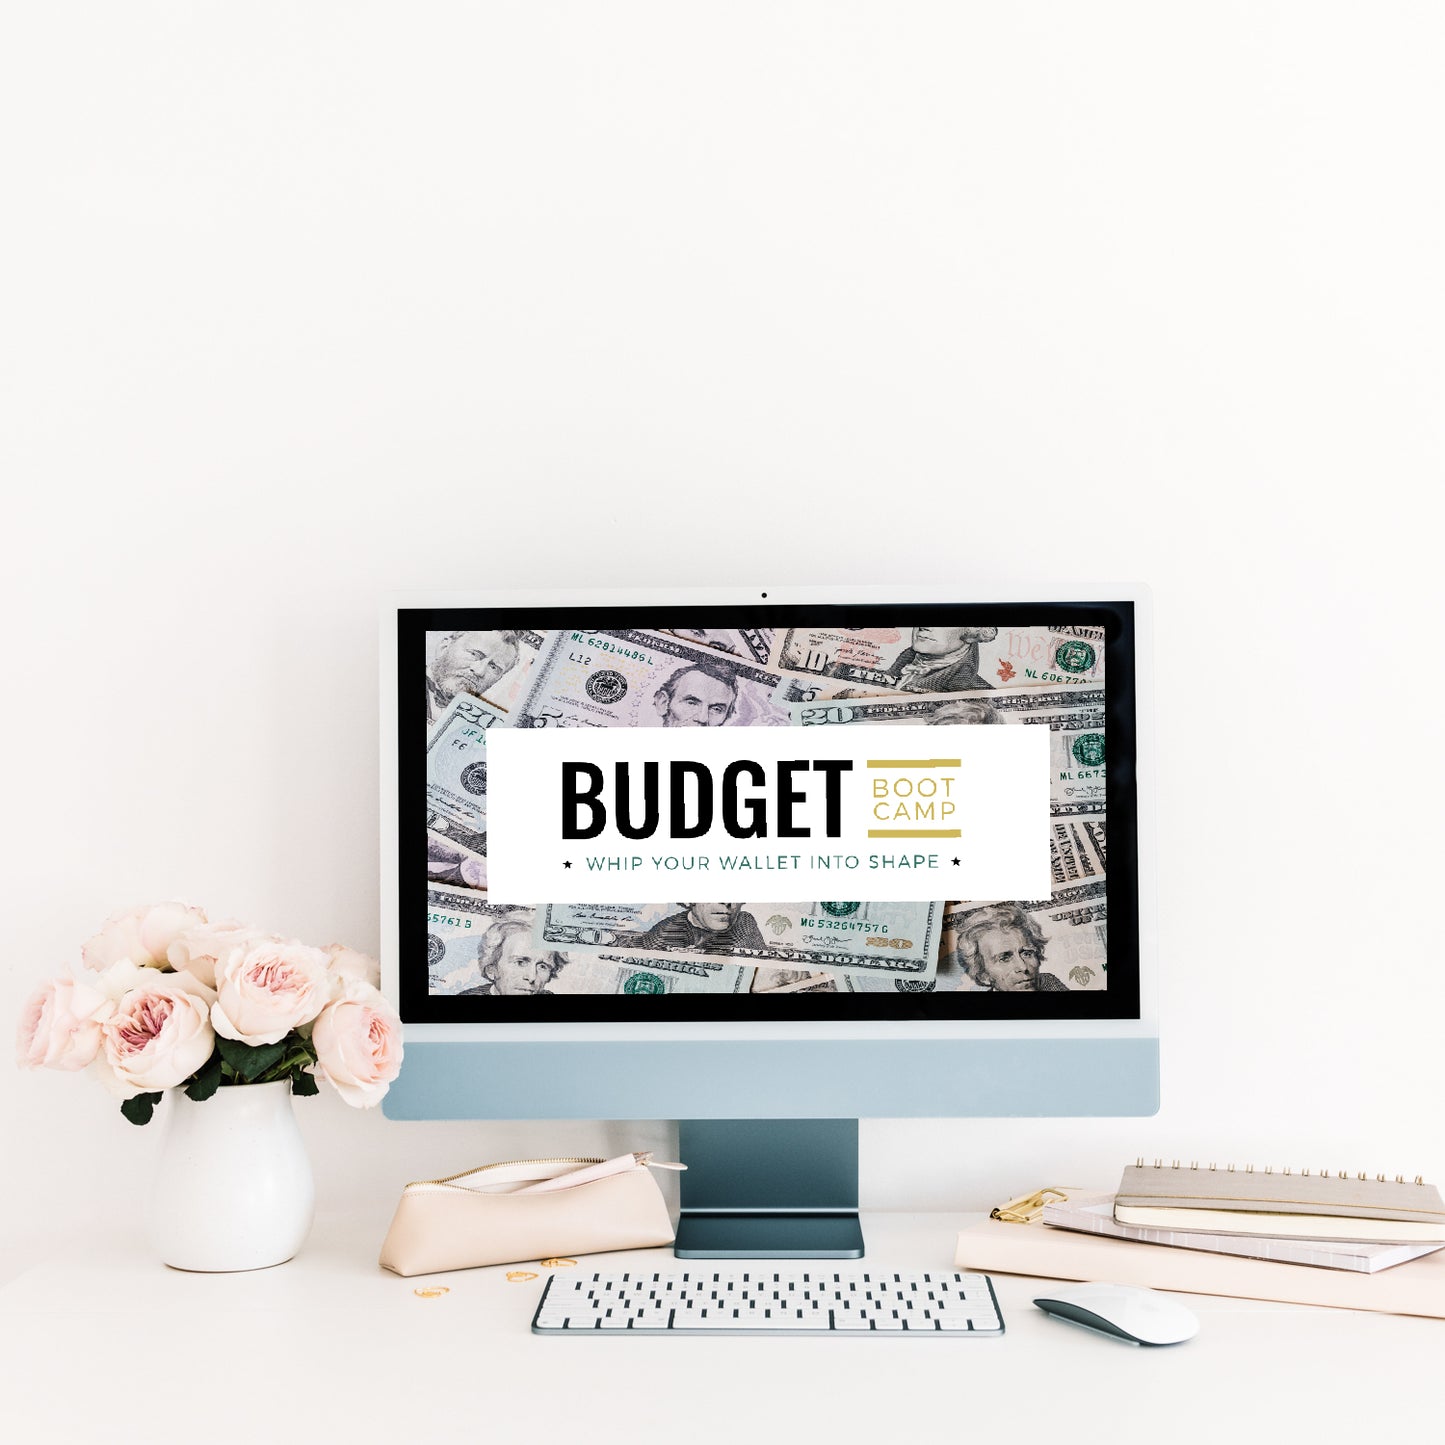 Budget Boot Camp® - 6-Month Payment Plan